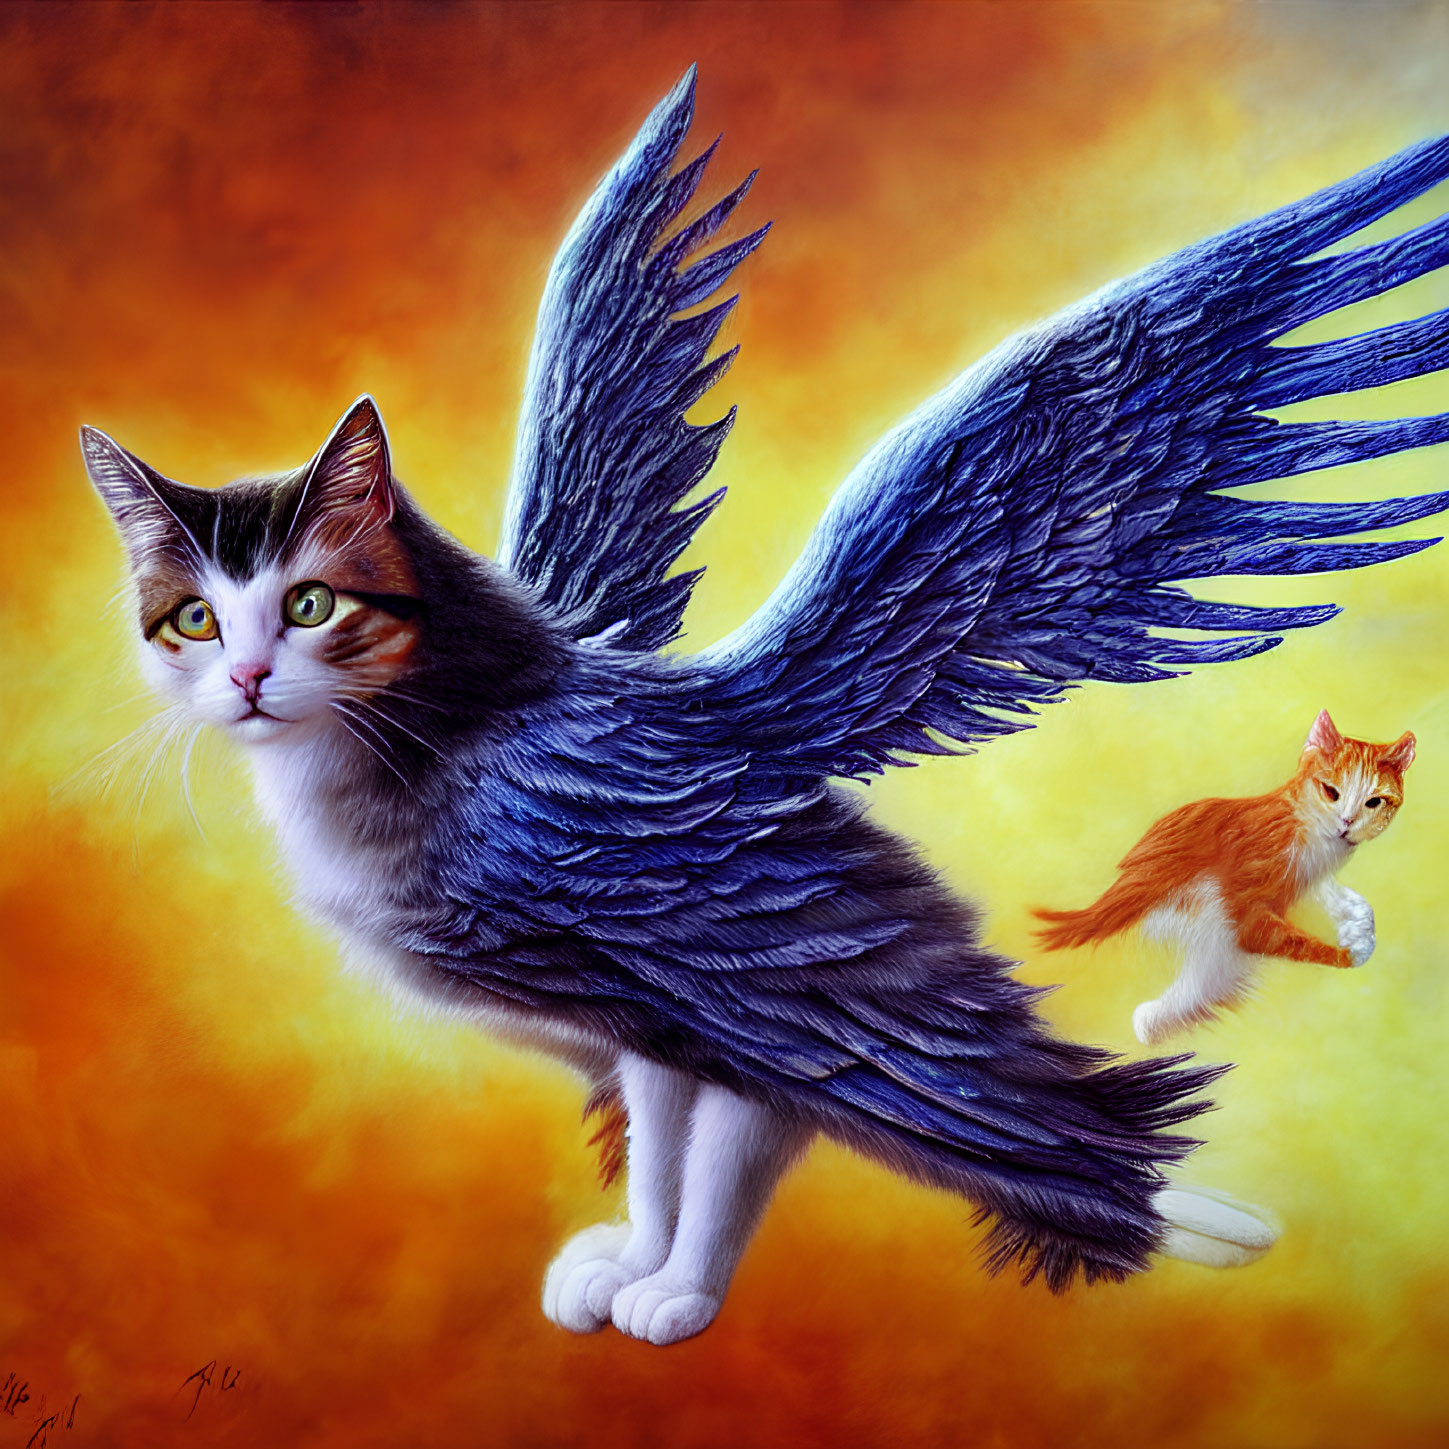 Fantastical painting of white cat with blue wings on fiery orange background